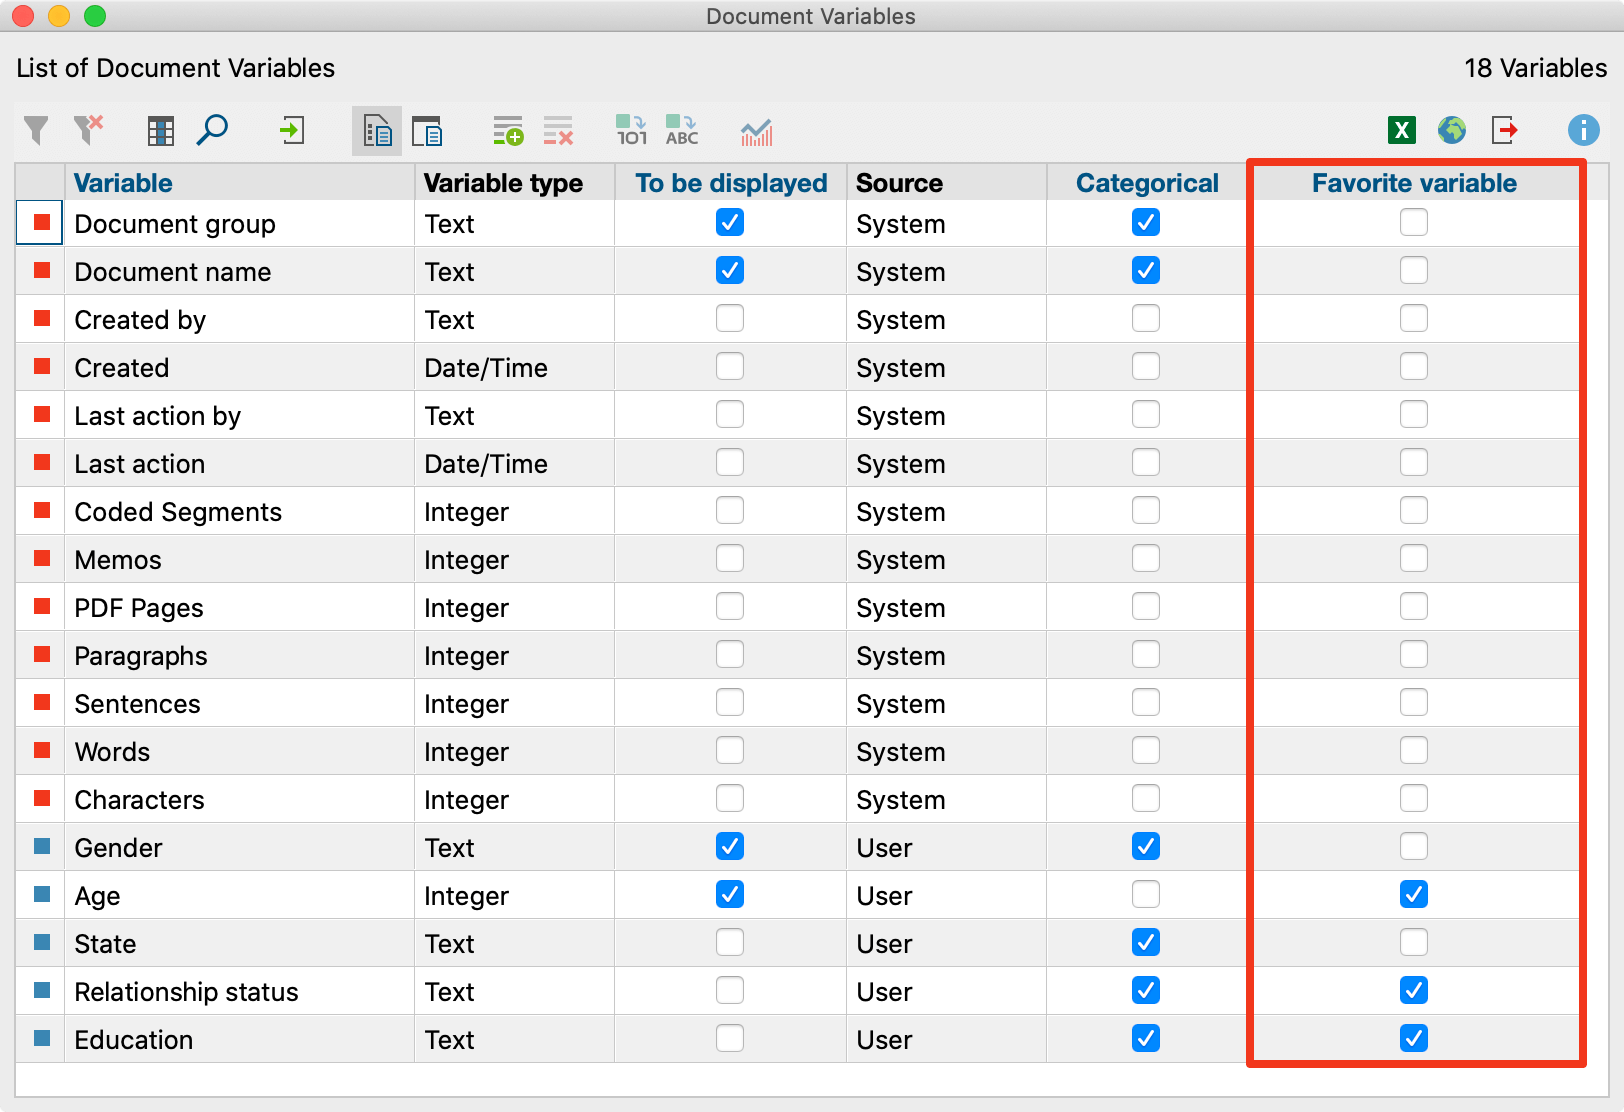 Selecting Favorite Variables in the List of Document Variables